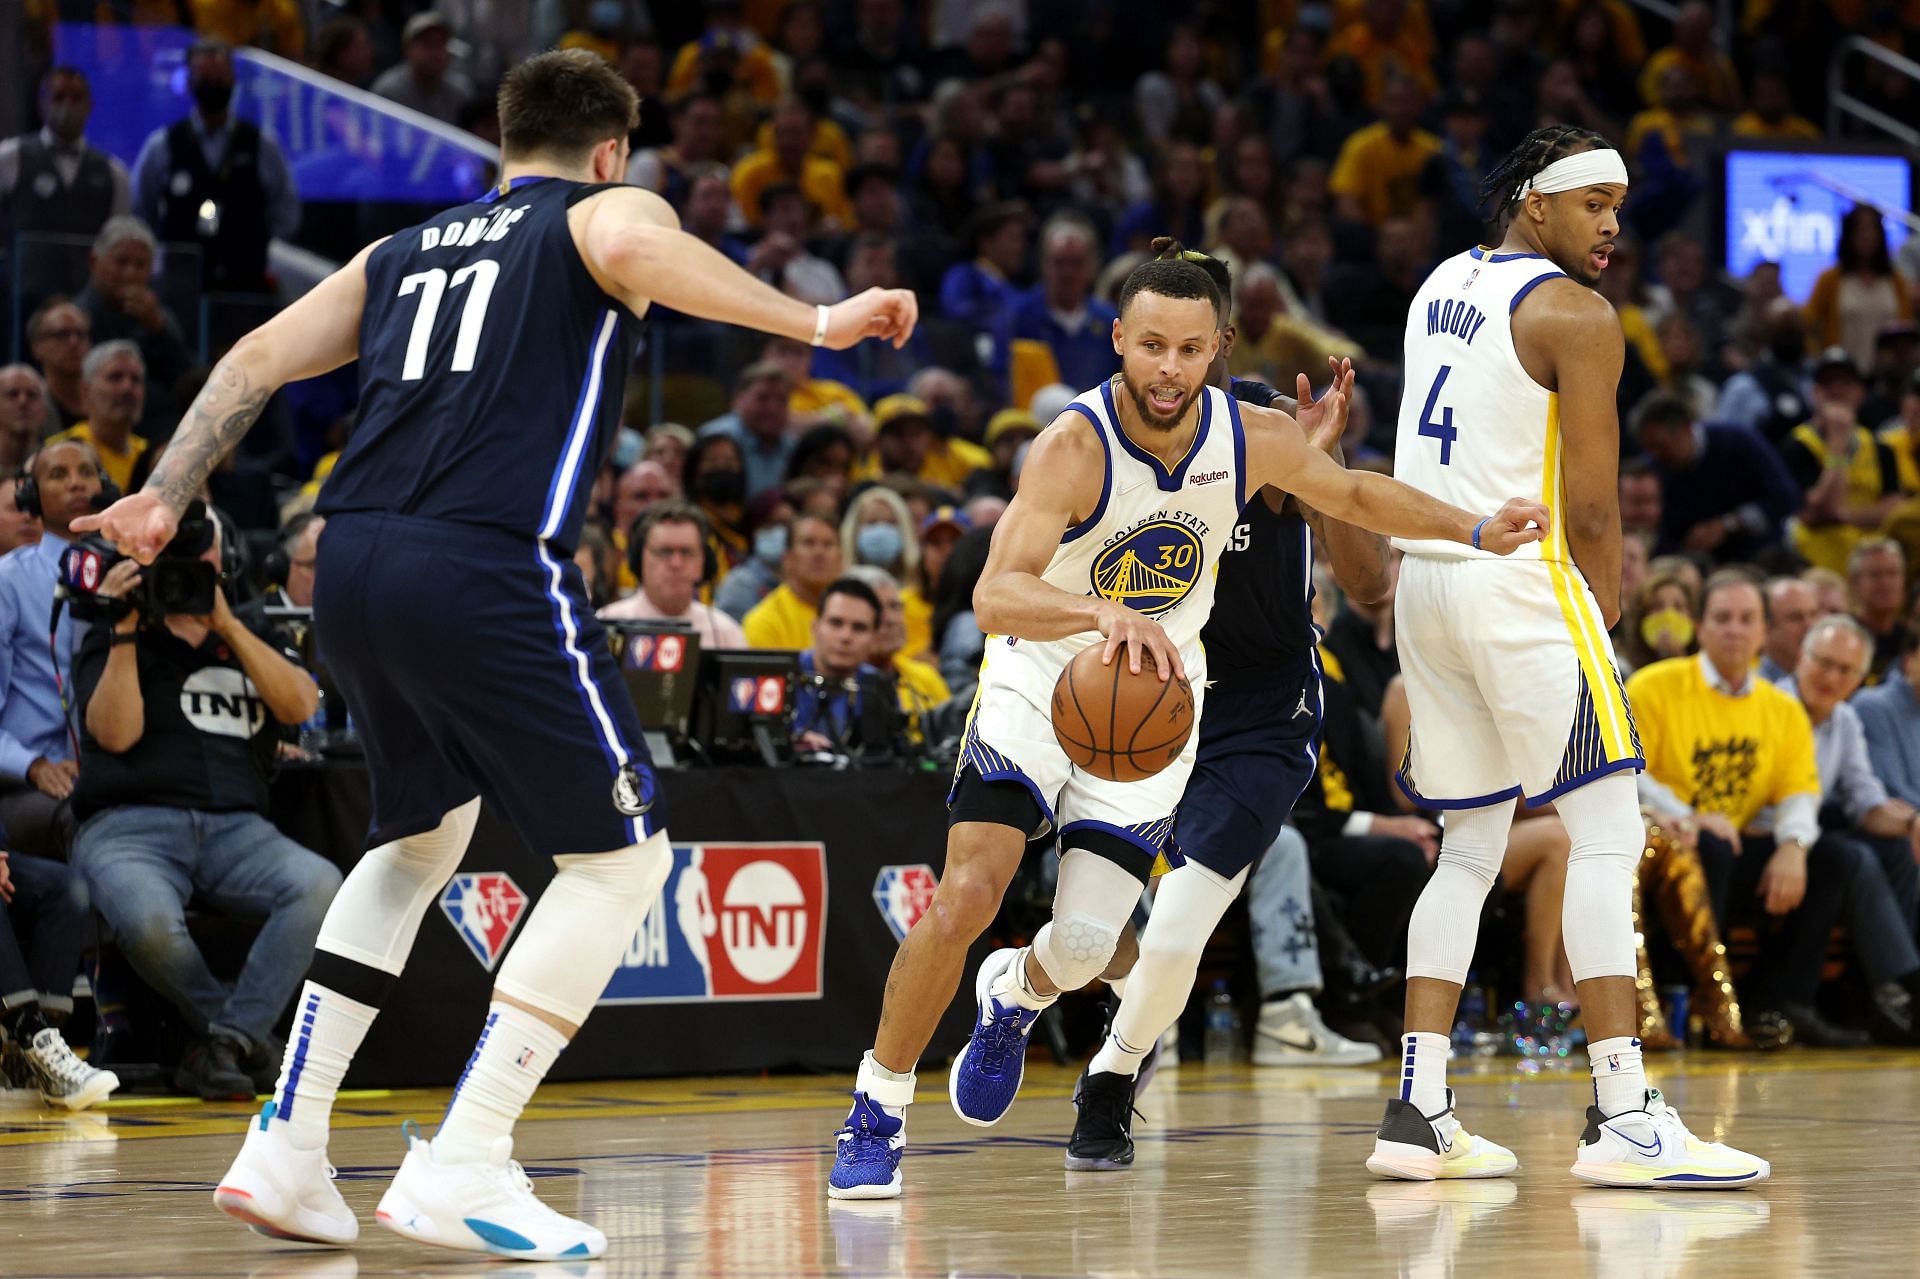 Steph Curry #30 of the Golden State Warriors drives to the basket against Luka Doncic #77 of the Dallas Mavericks